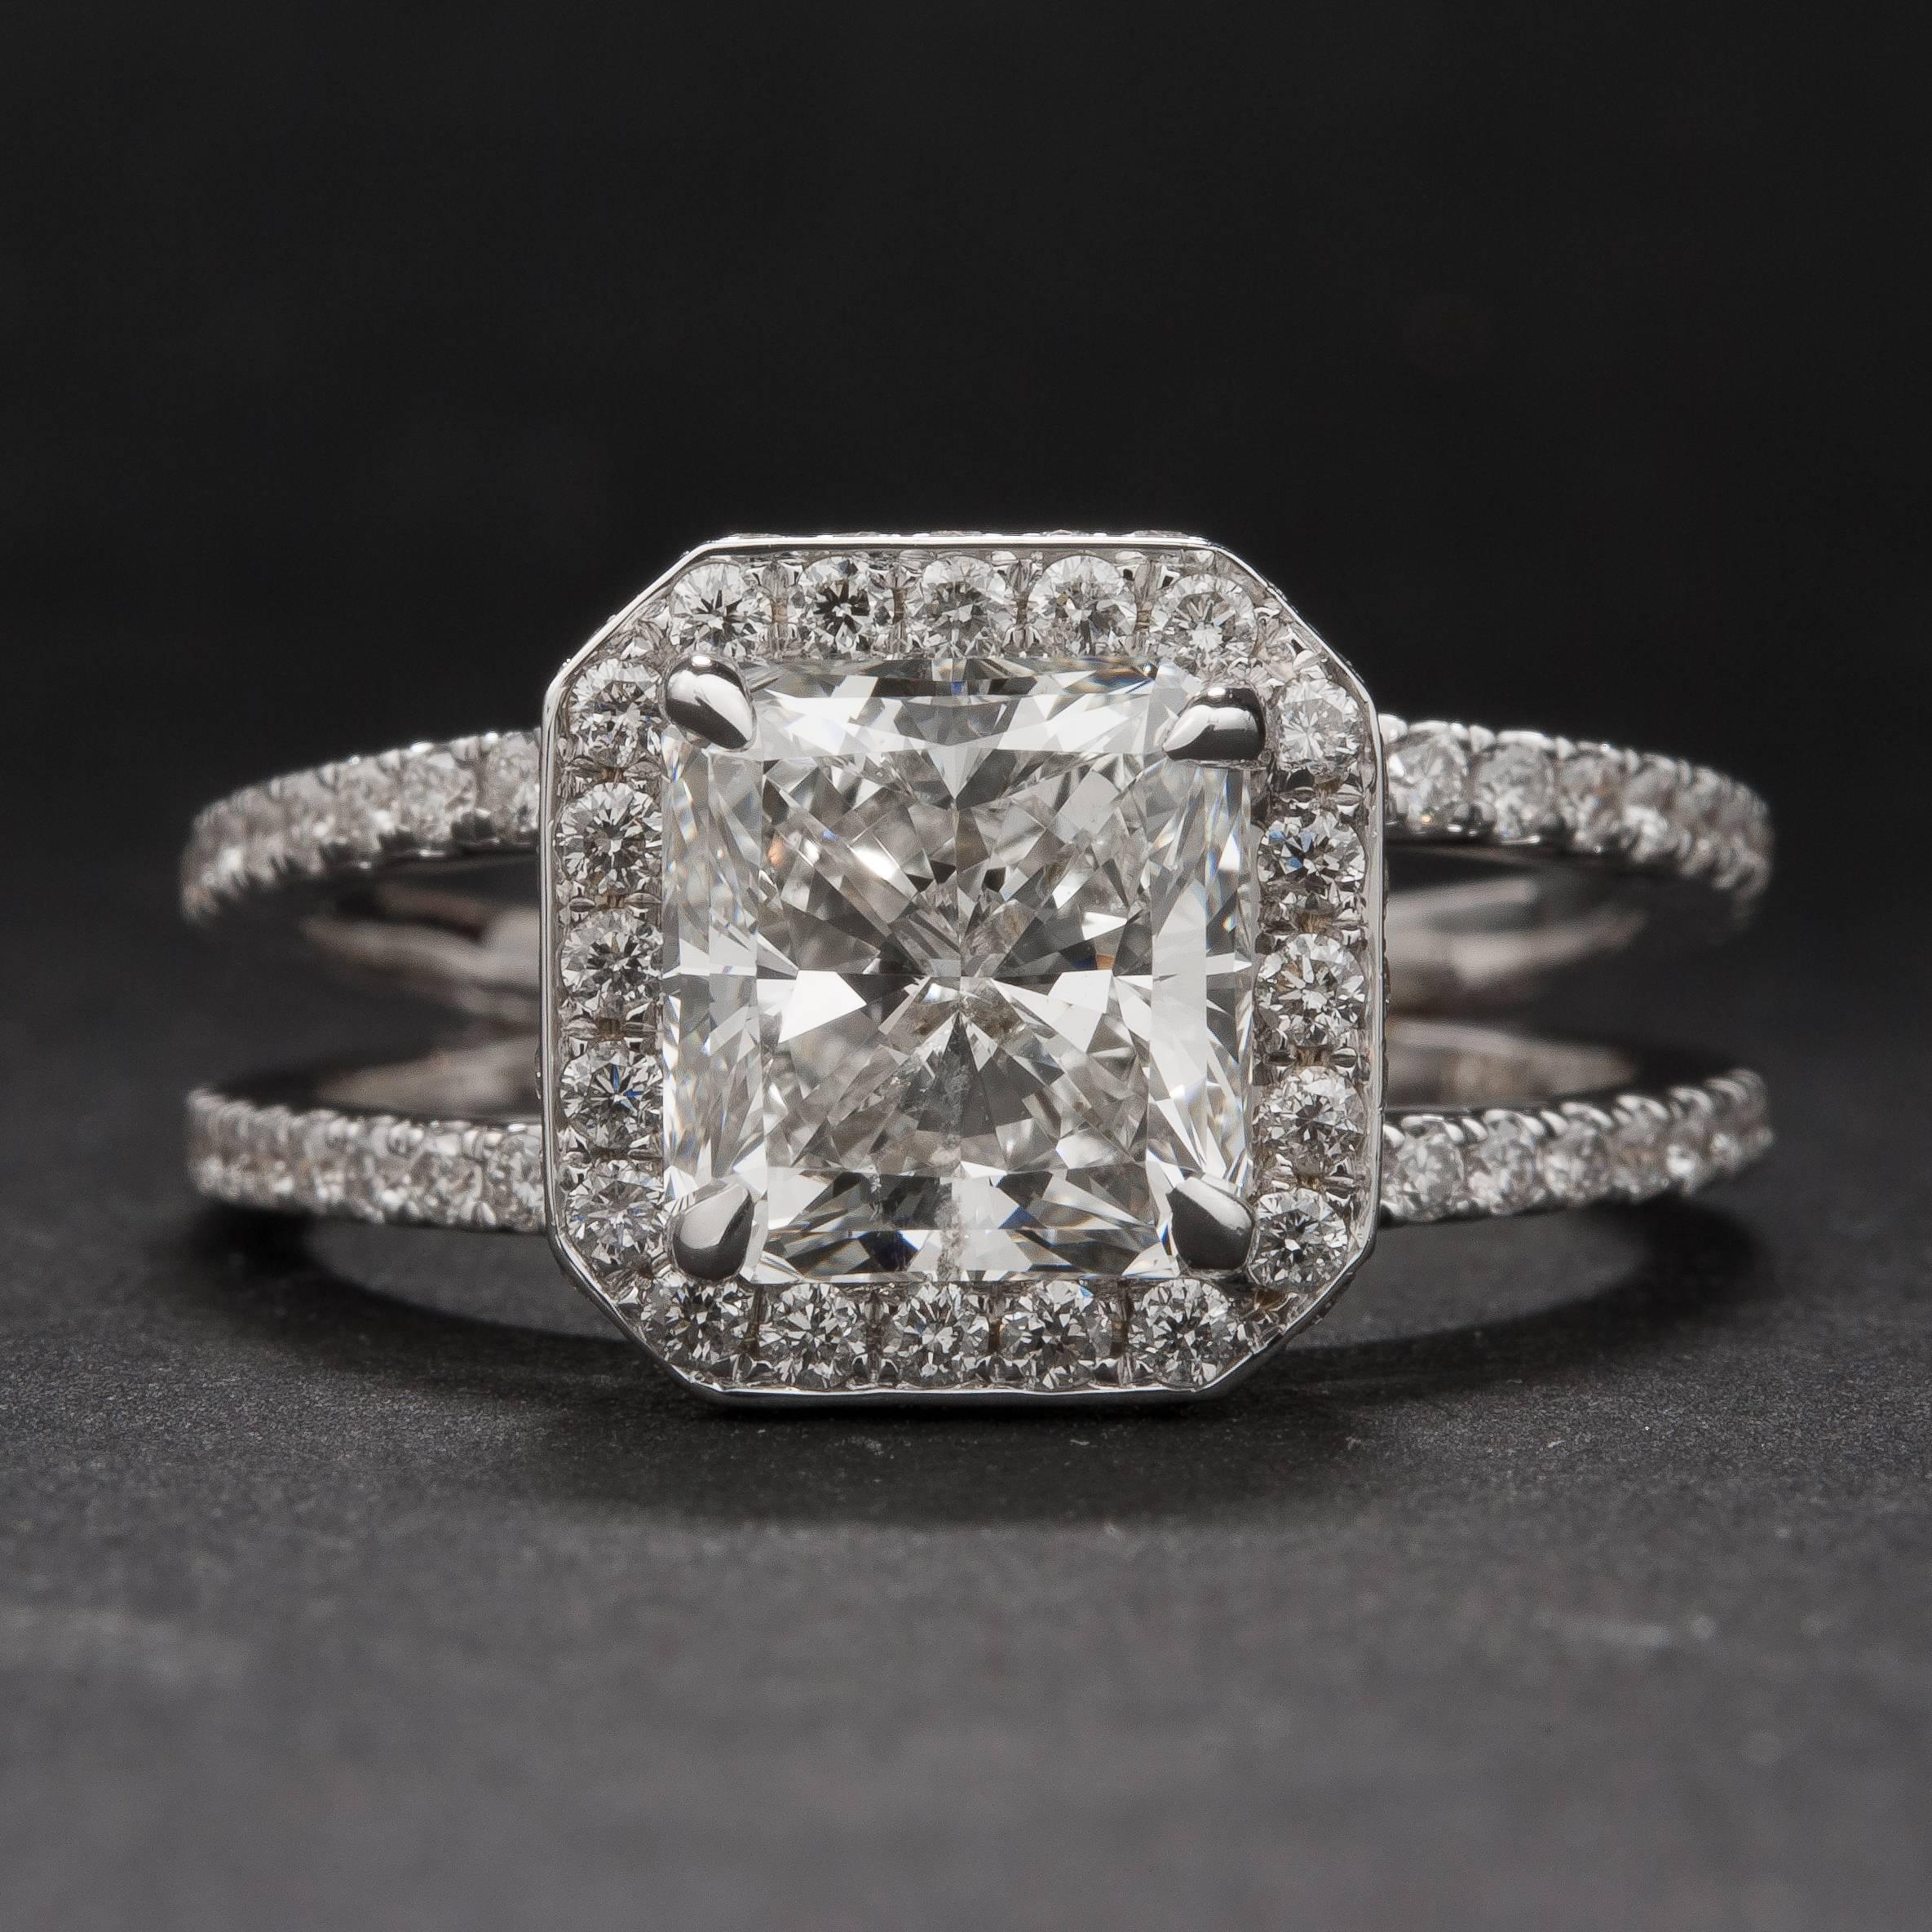 A stunning 2.05 carat (est. F color, VS2 clarity) radiant cut diamond ring with an 18k white gold split-shank mounting. The center stone is accented by .90 total carats of side diamonds  and the ring is currently size 6.75.